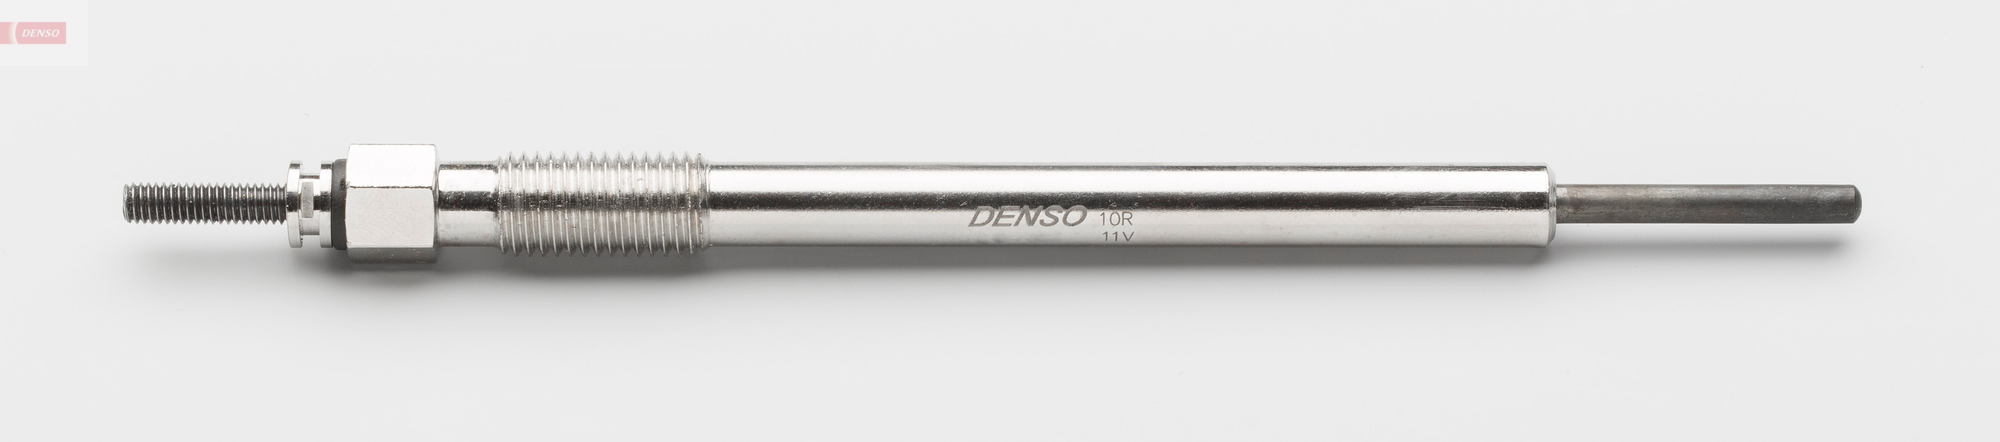 Picture of DENSO - DG-600 - Glow Plug (Glow Ignition System)